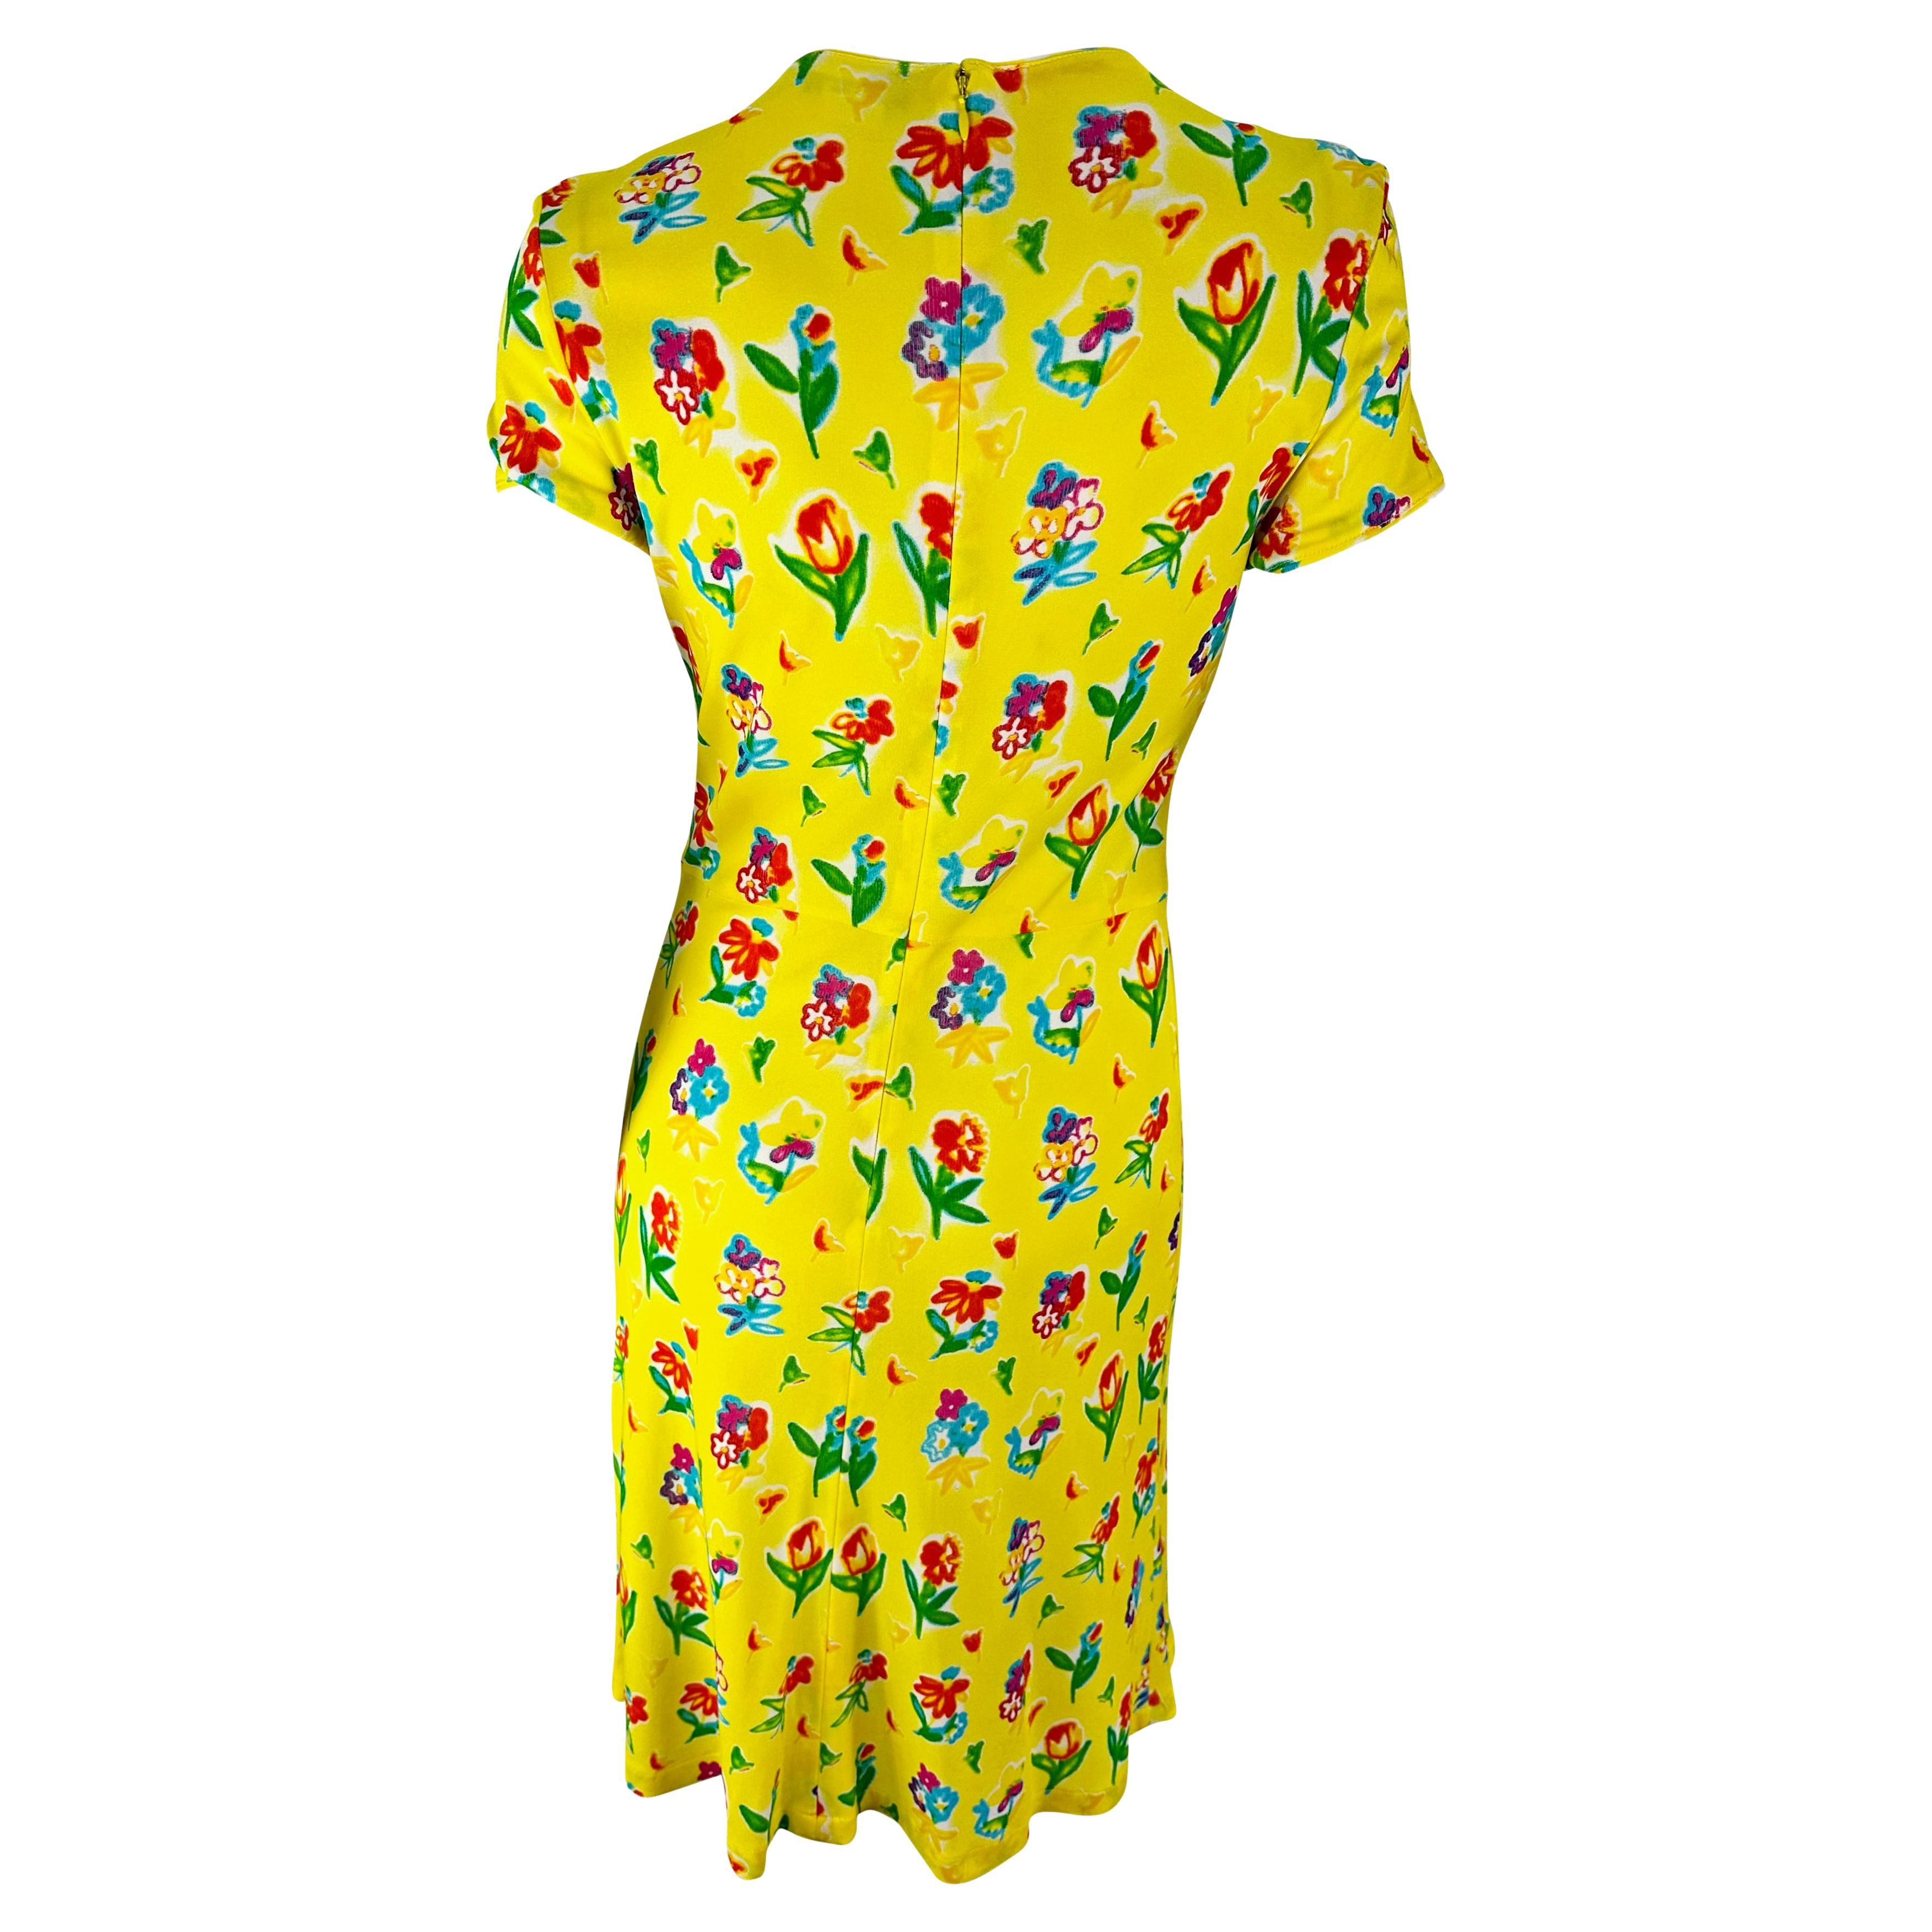 S/S 1996 Gianni Versace Yellow Floral Short Sleeve Viscose Midi Dress For Sale 1